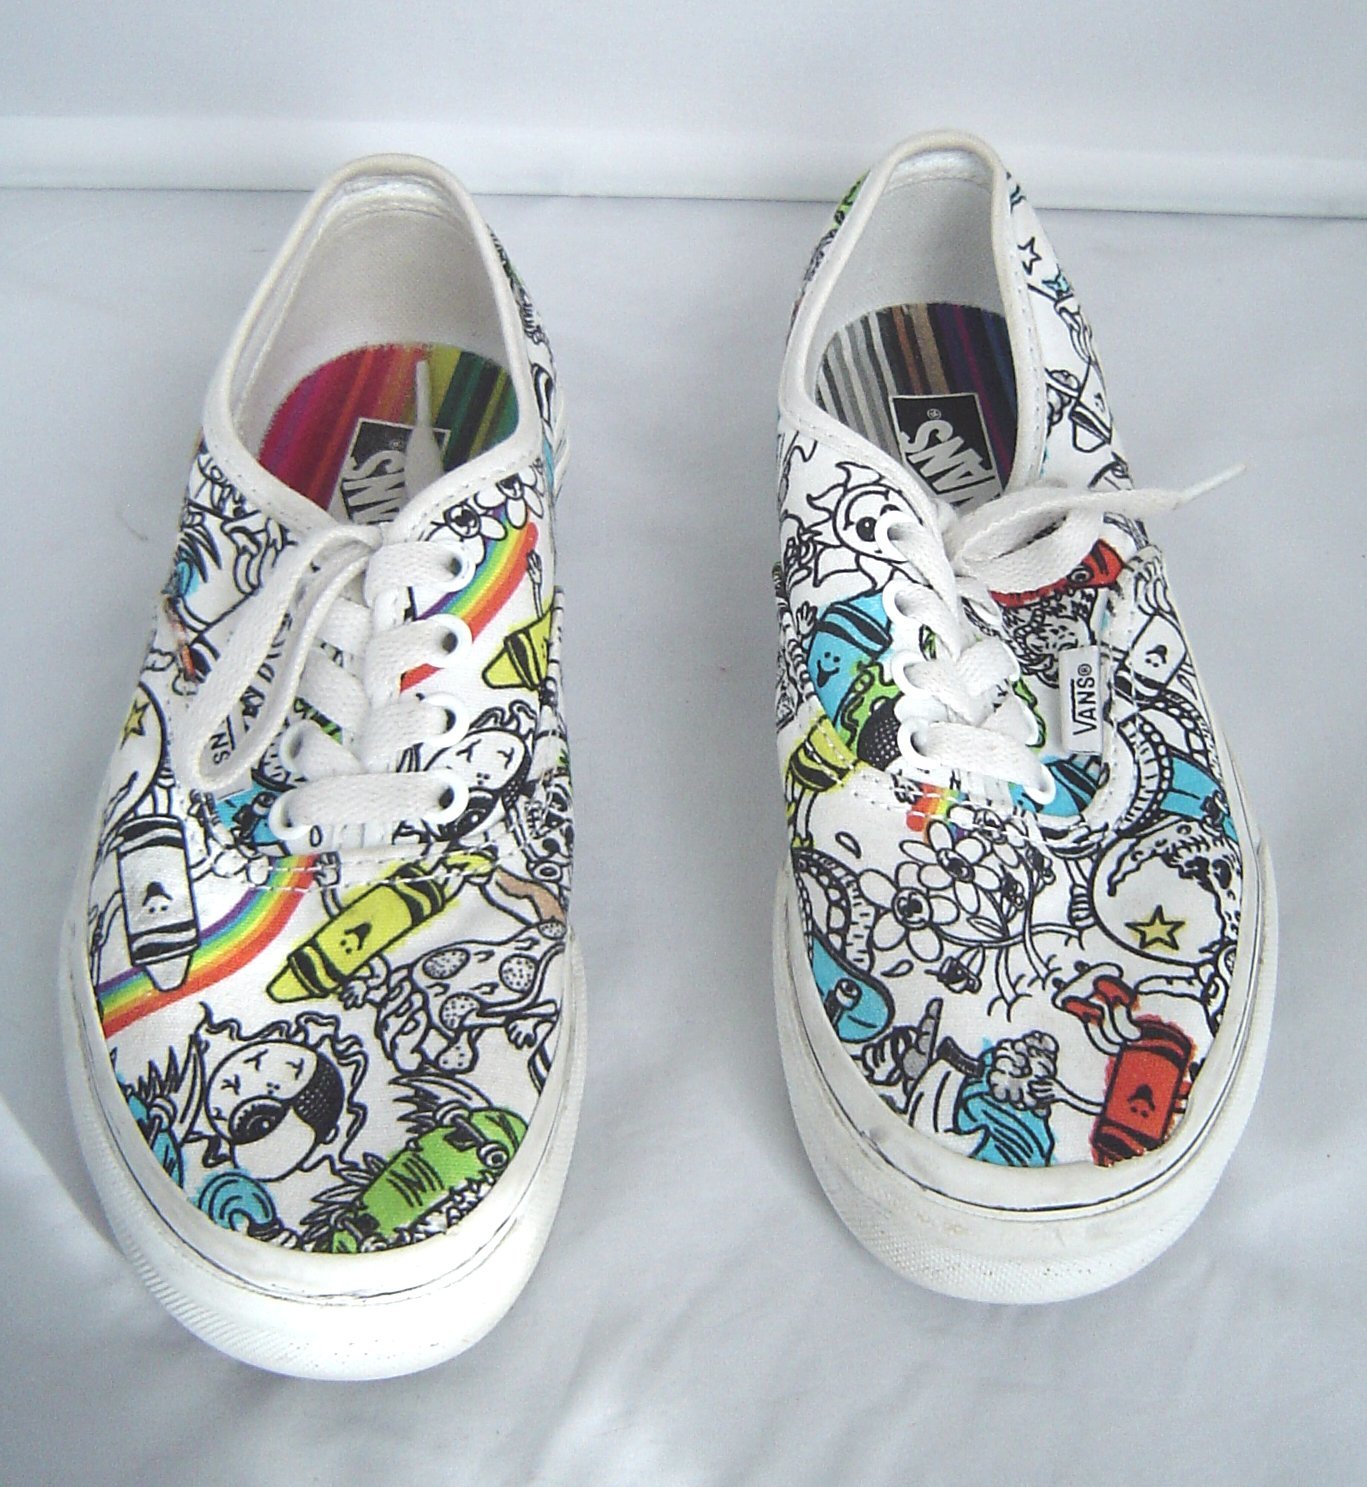 Vans CRAYOLA Low Top Sneakers Kids Size 2 White Graphic Crayon Print Shoes  - $24.99